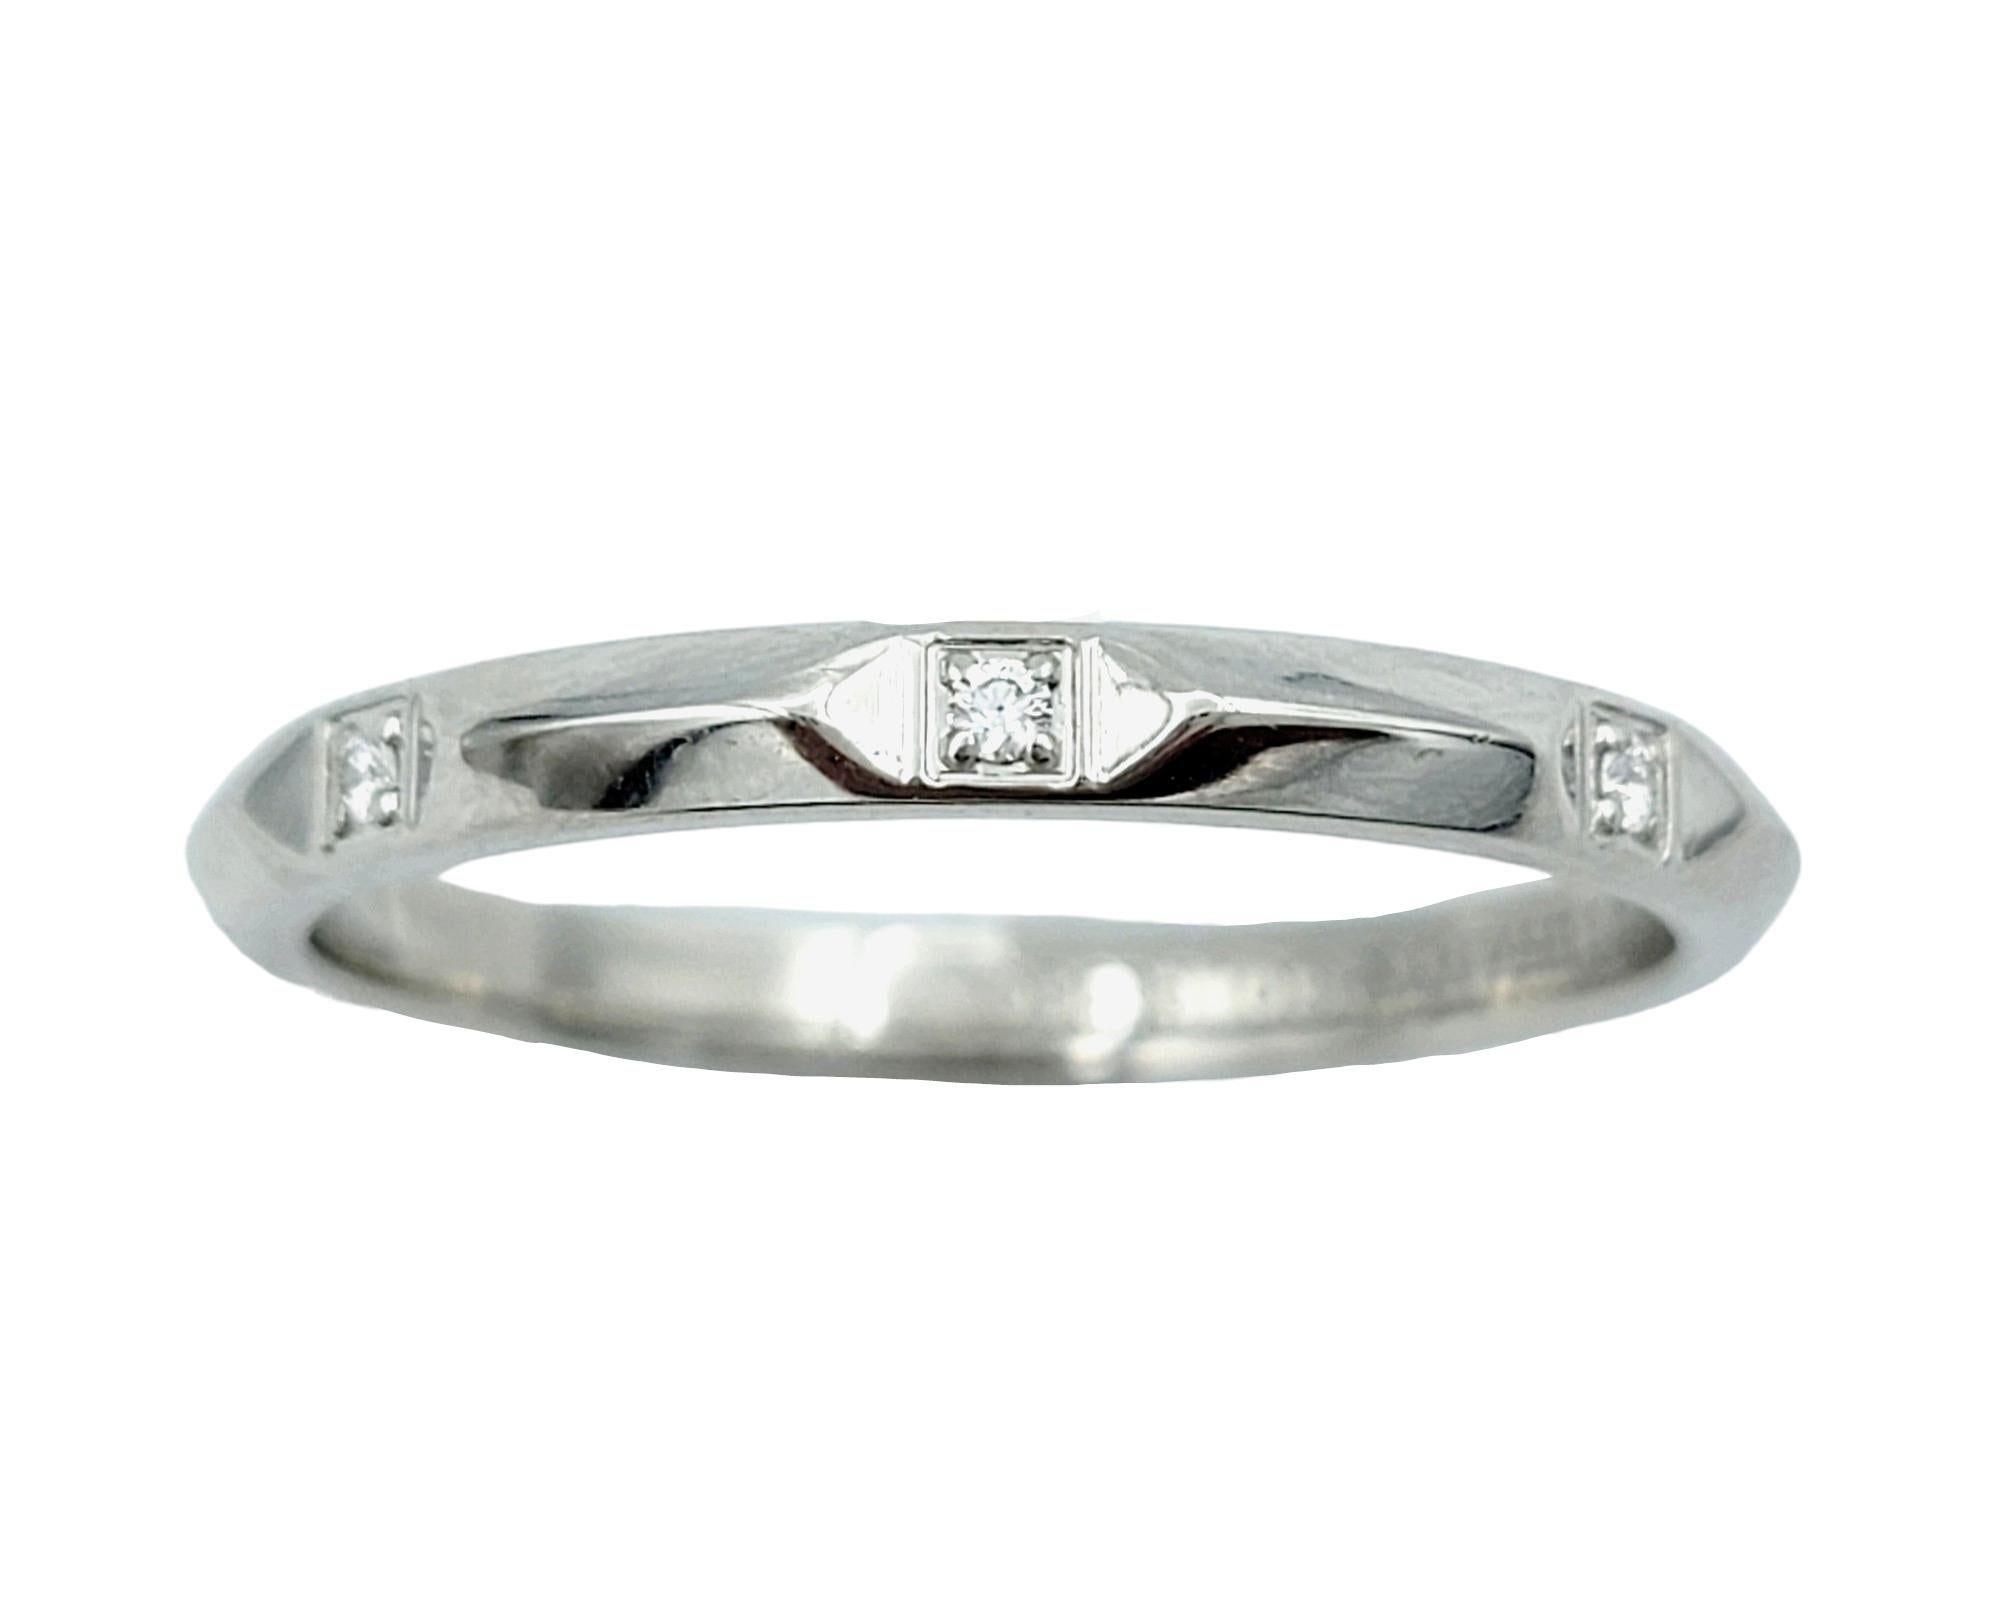 Ring Size: 11

This beautiful Tiffany & Co. Tiffany True Collection wedding band, exquisitely crafted in platinum, is a symbol of enduring love and commitment. This elegant wedding band features a sleek and sophisticated beveled edge platinum band